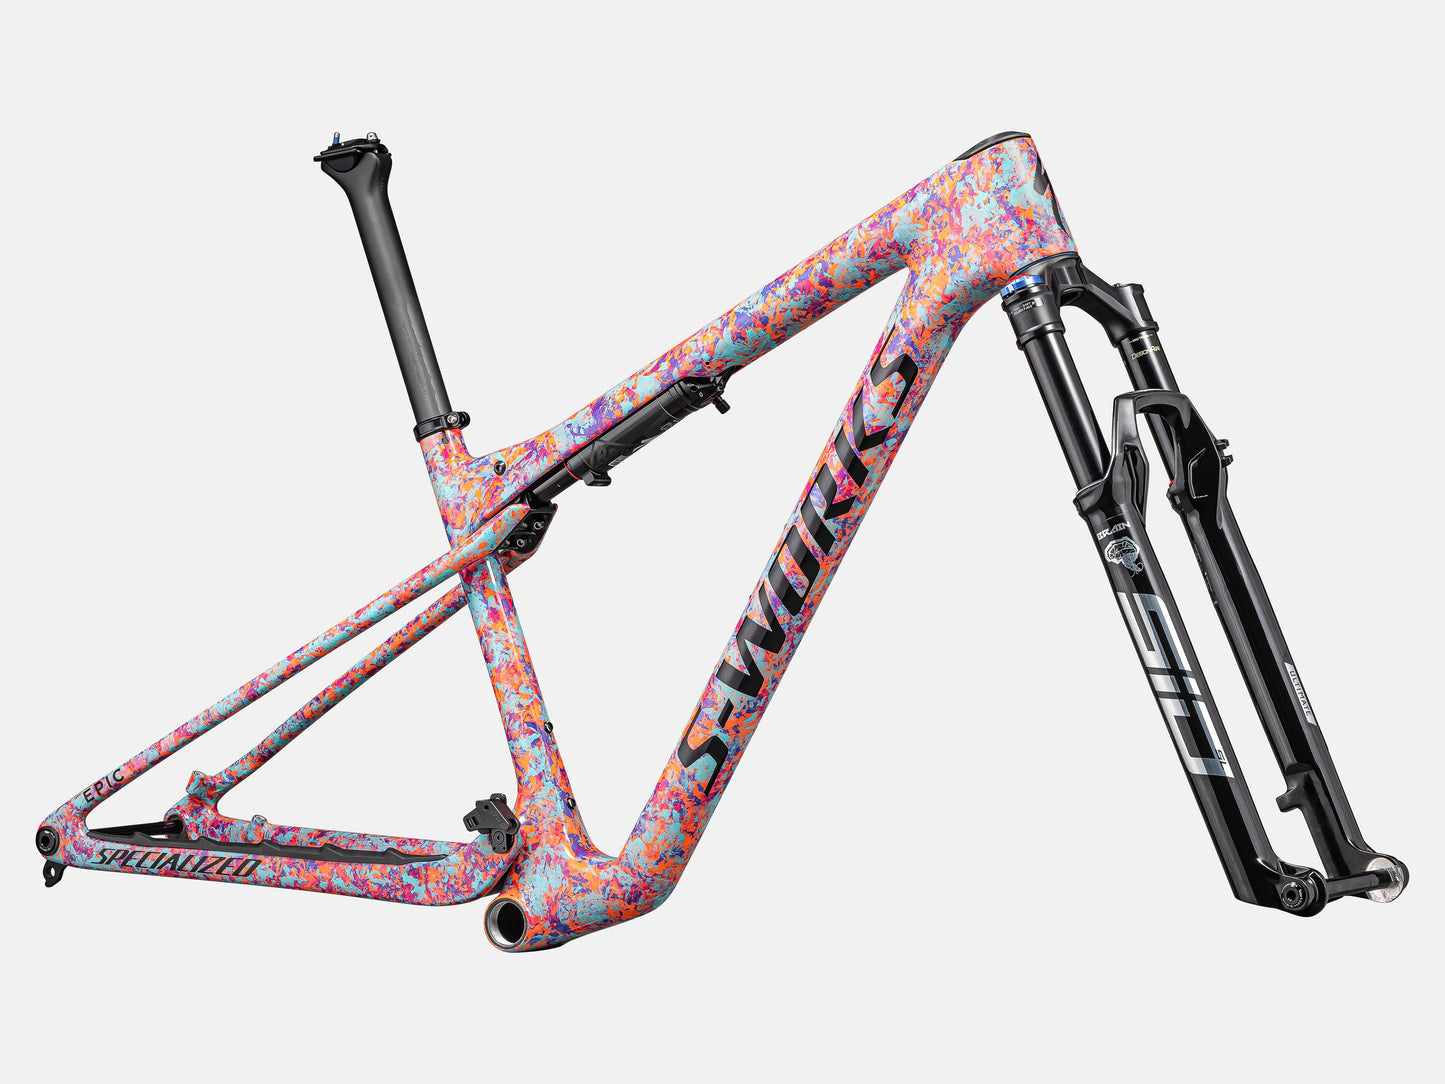 Specialized S-Works Epic World Cup Frameset